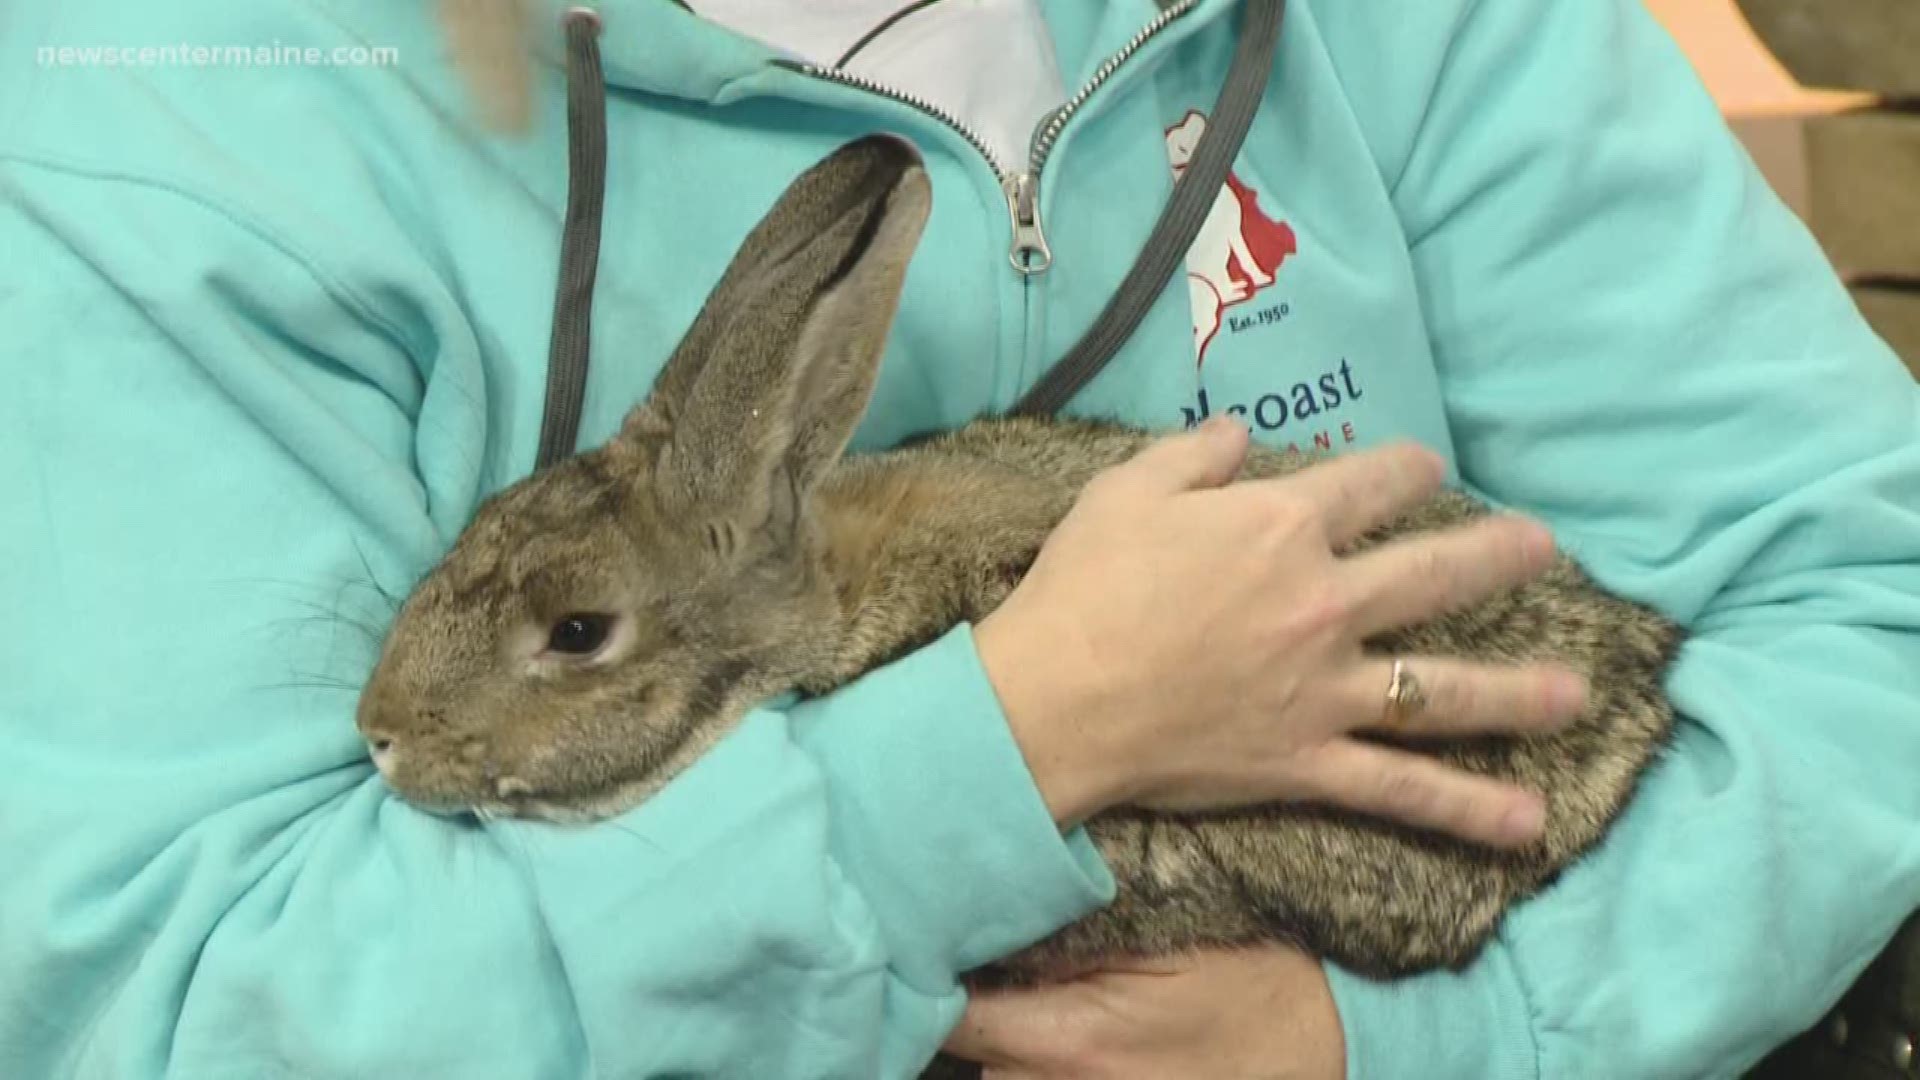 Pedfoot the bunny, is described as calm and relaxed or 'zen bunny,' and he is up for adoption. He is available at Mid Coast Humane Society